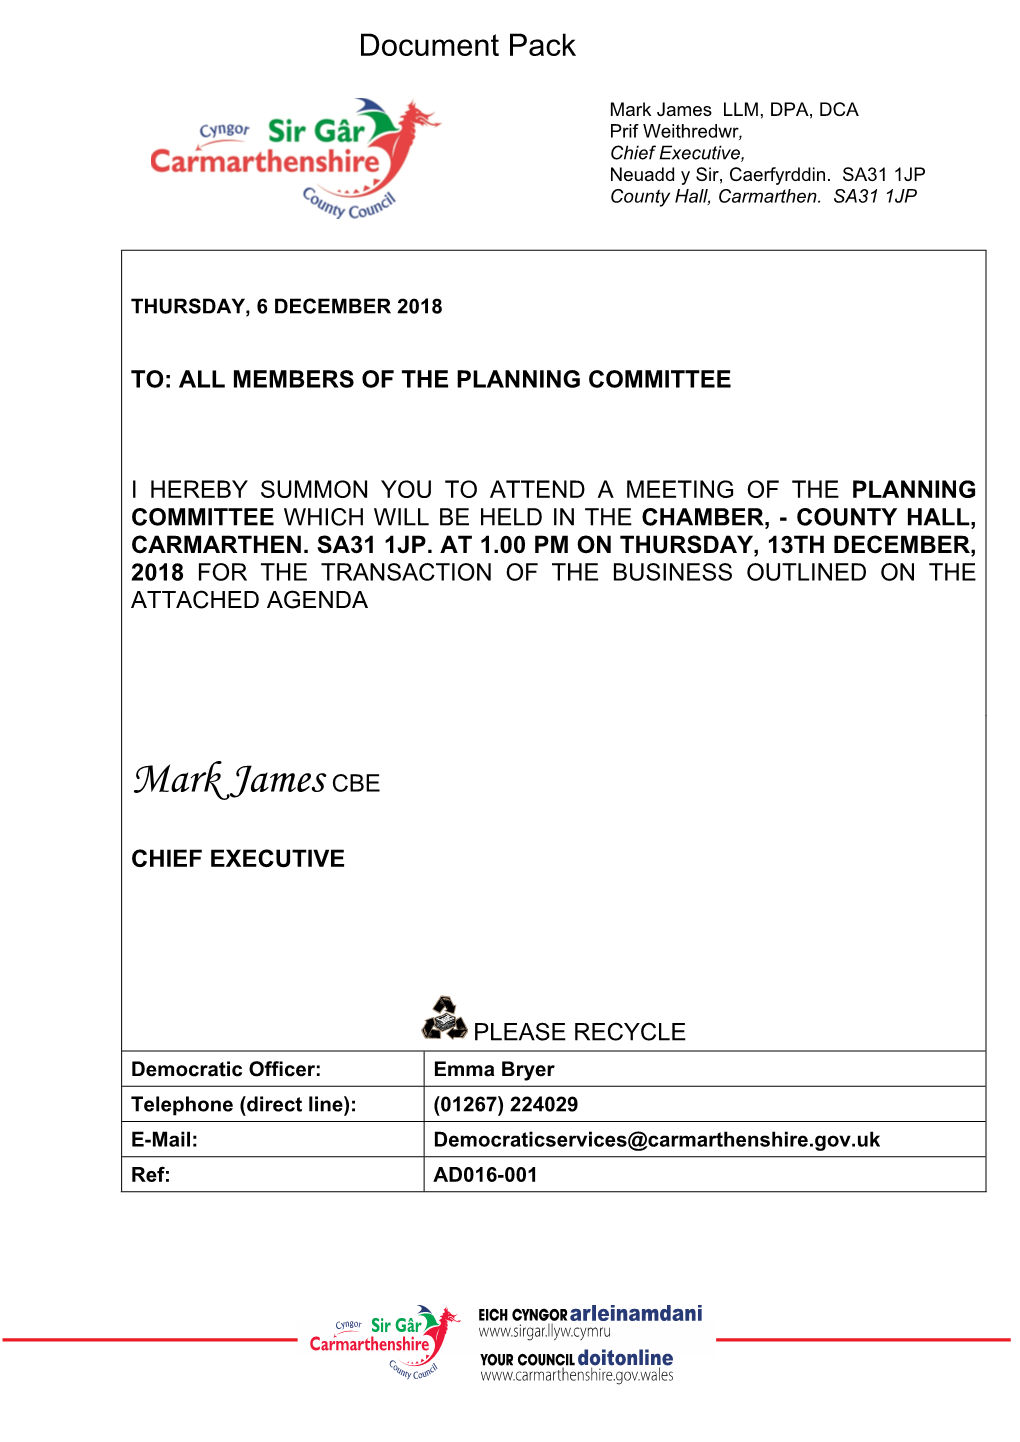 (Public Pack)Agenda Document for Planning Committee, 13/12/2018 13:00